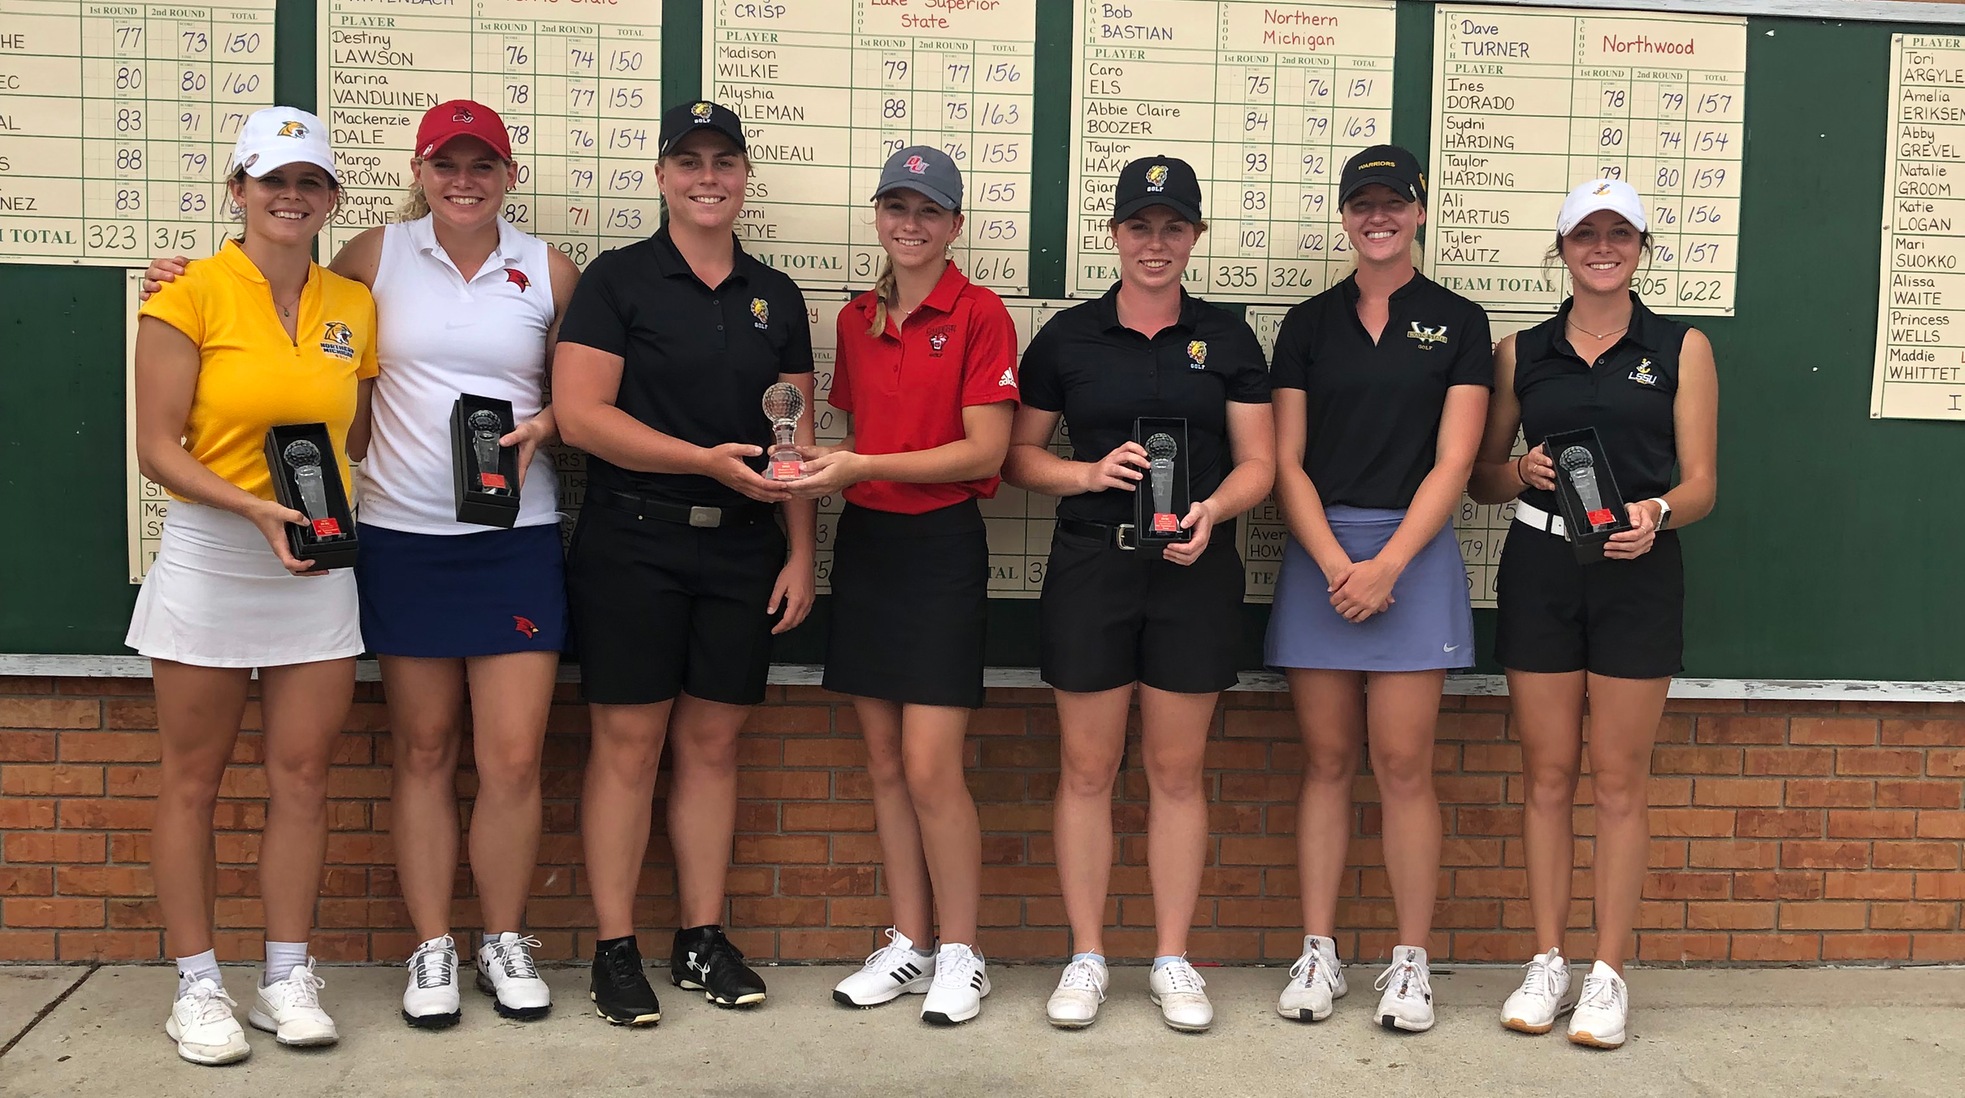 Coffman fires second round 70 to earn all-tournament honors at SVSU Fall Invitational